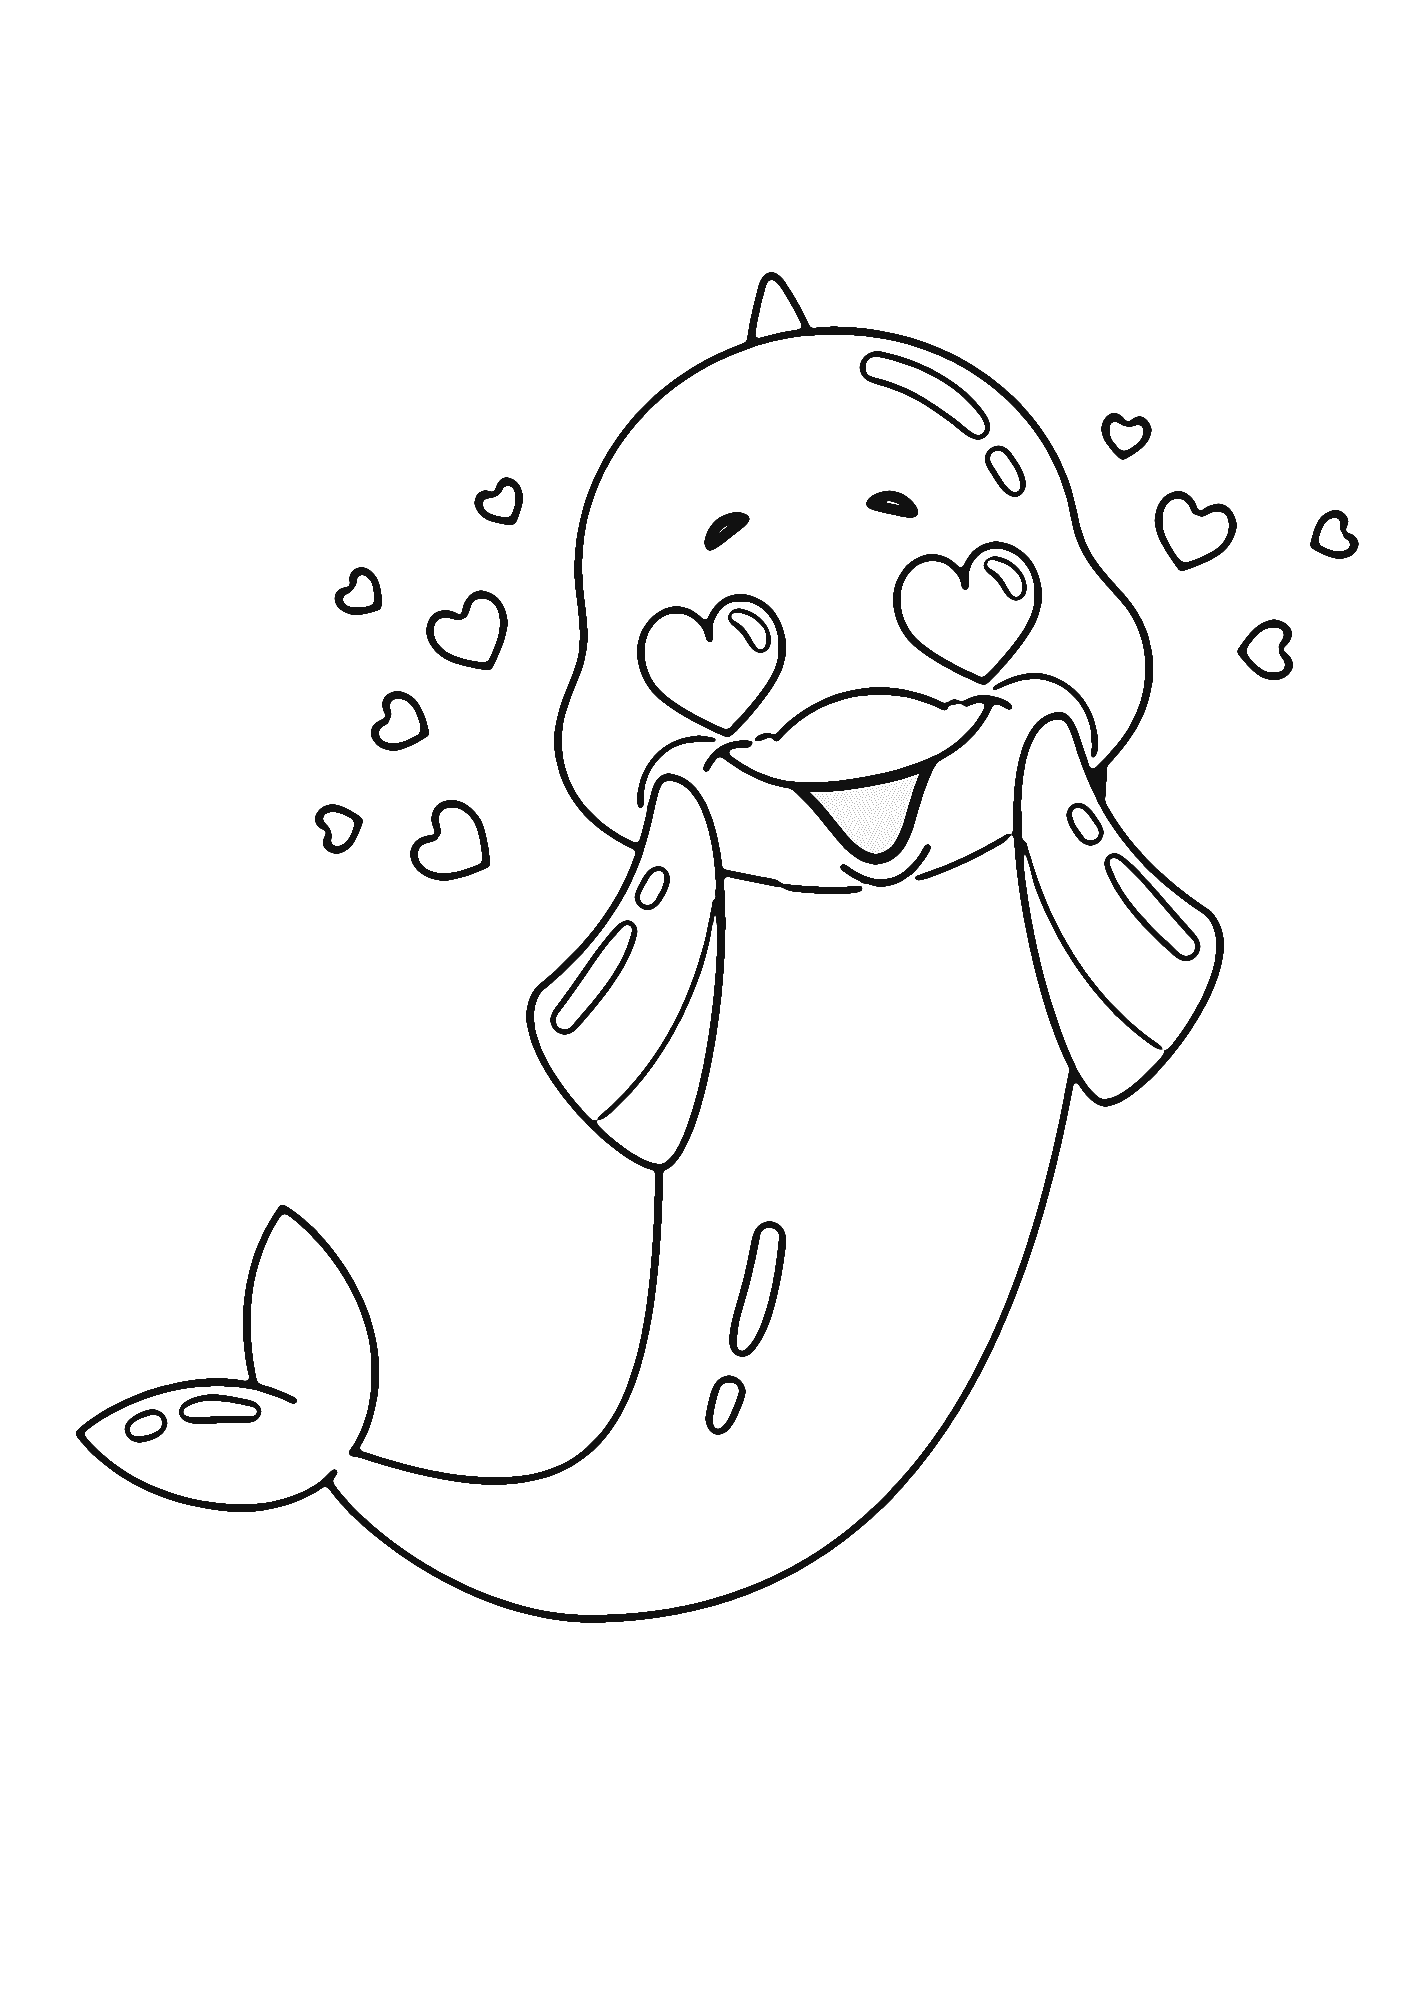 Love Dolphin Coloring Page